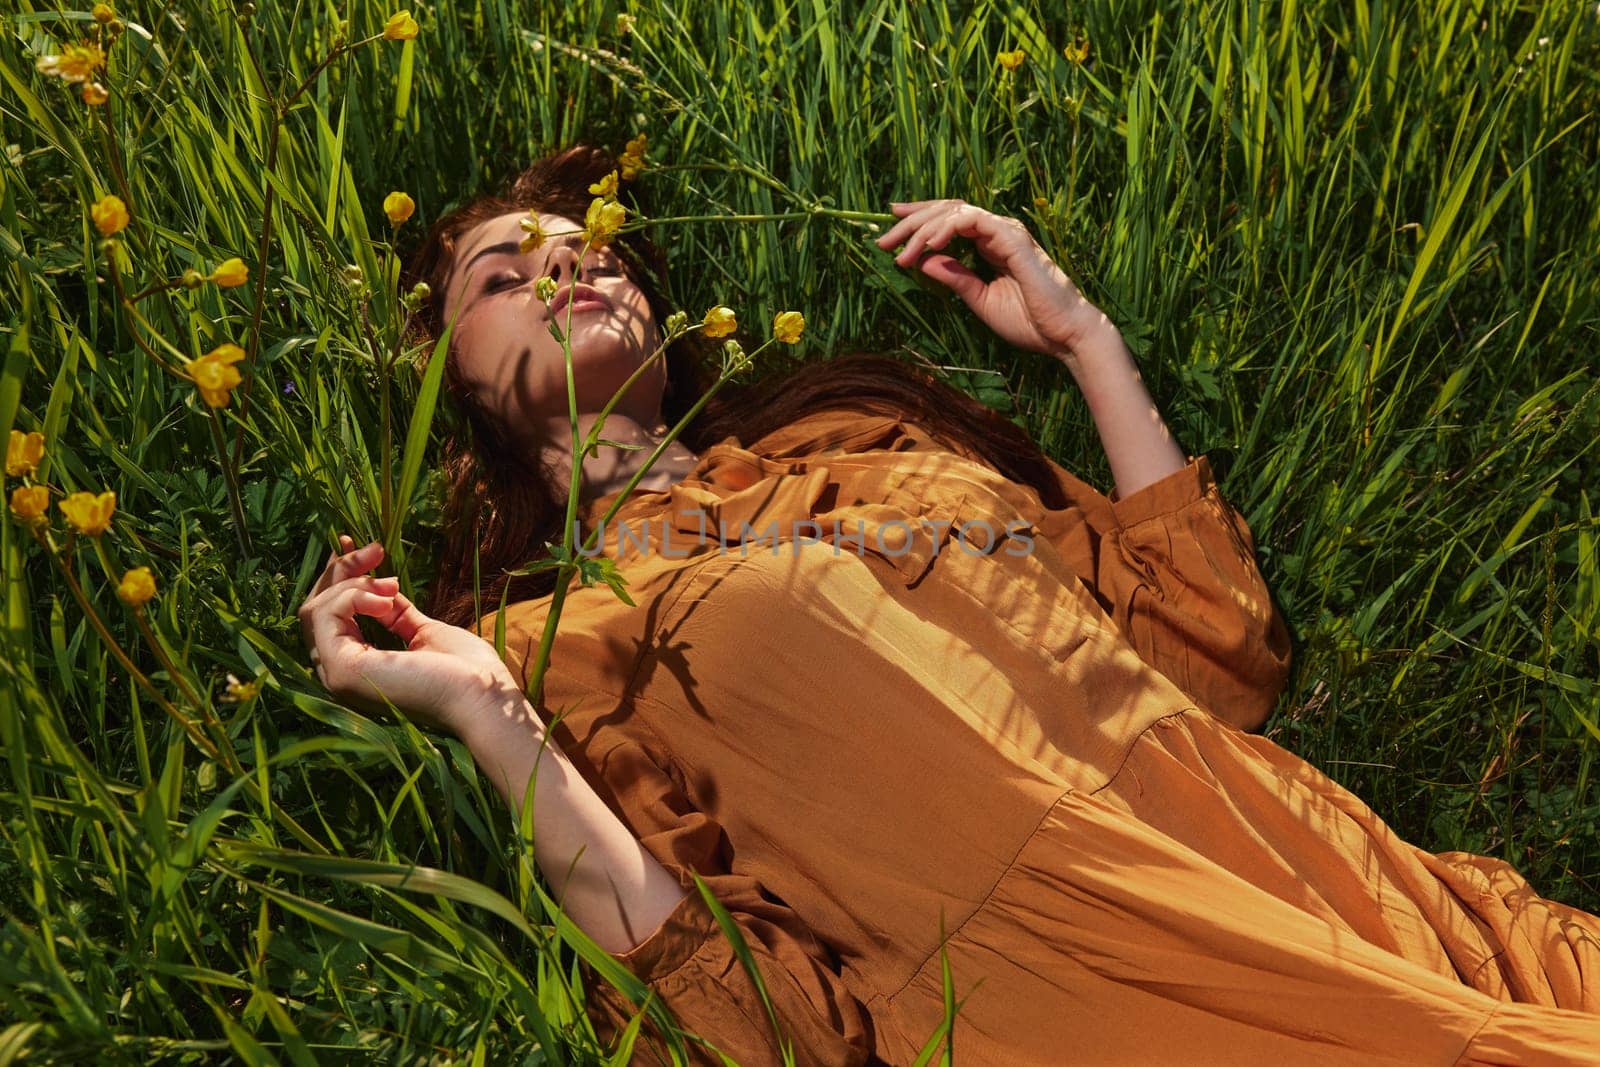 a calm woman with long red hair lies in a green field with yellow flowers, in an orange dress with her eyes closed, spreading her arms to the sides, enjoying peace and recuperating. High quality photo